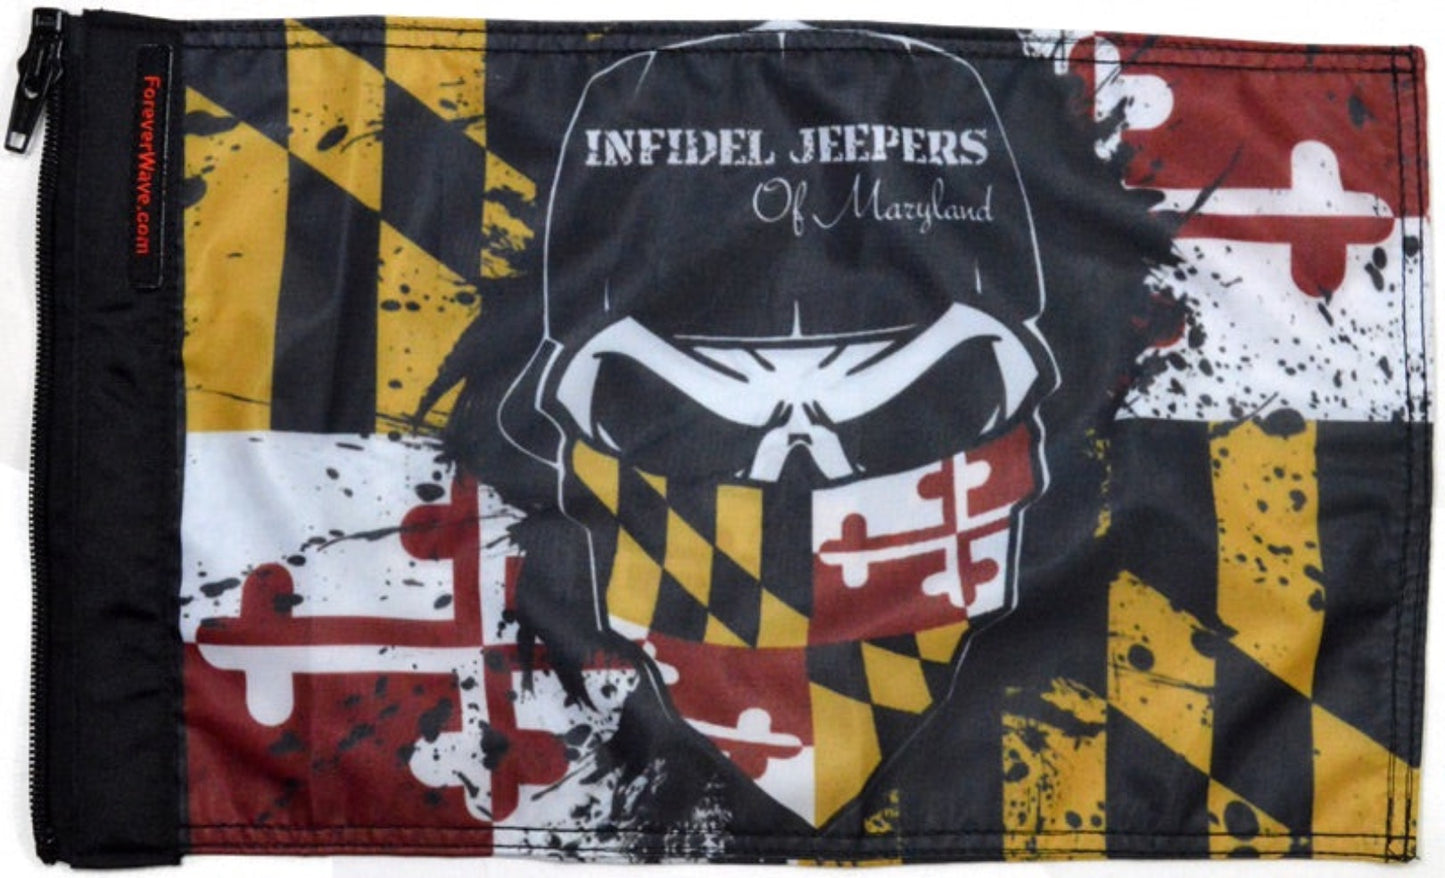 IJ of Maryland Flags Forever Wave 12”x18”